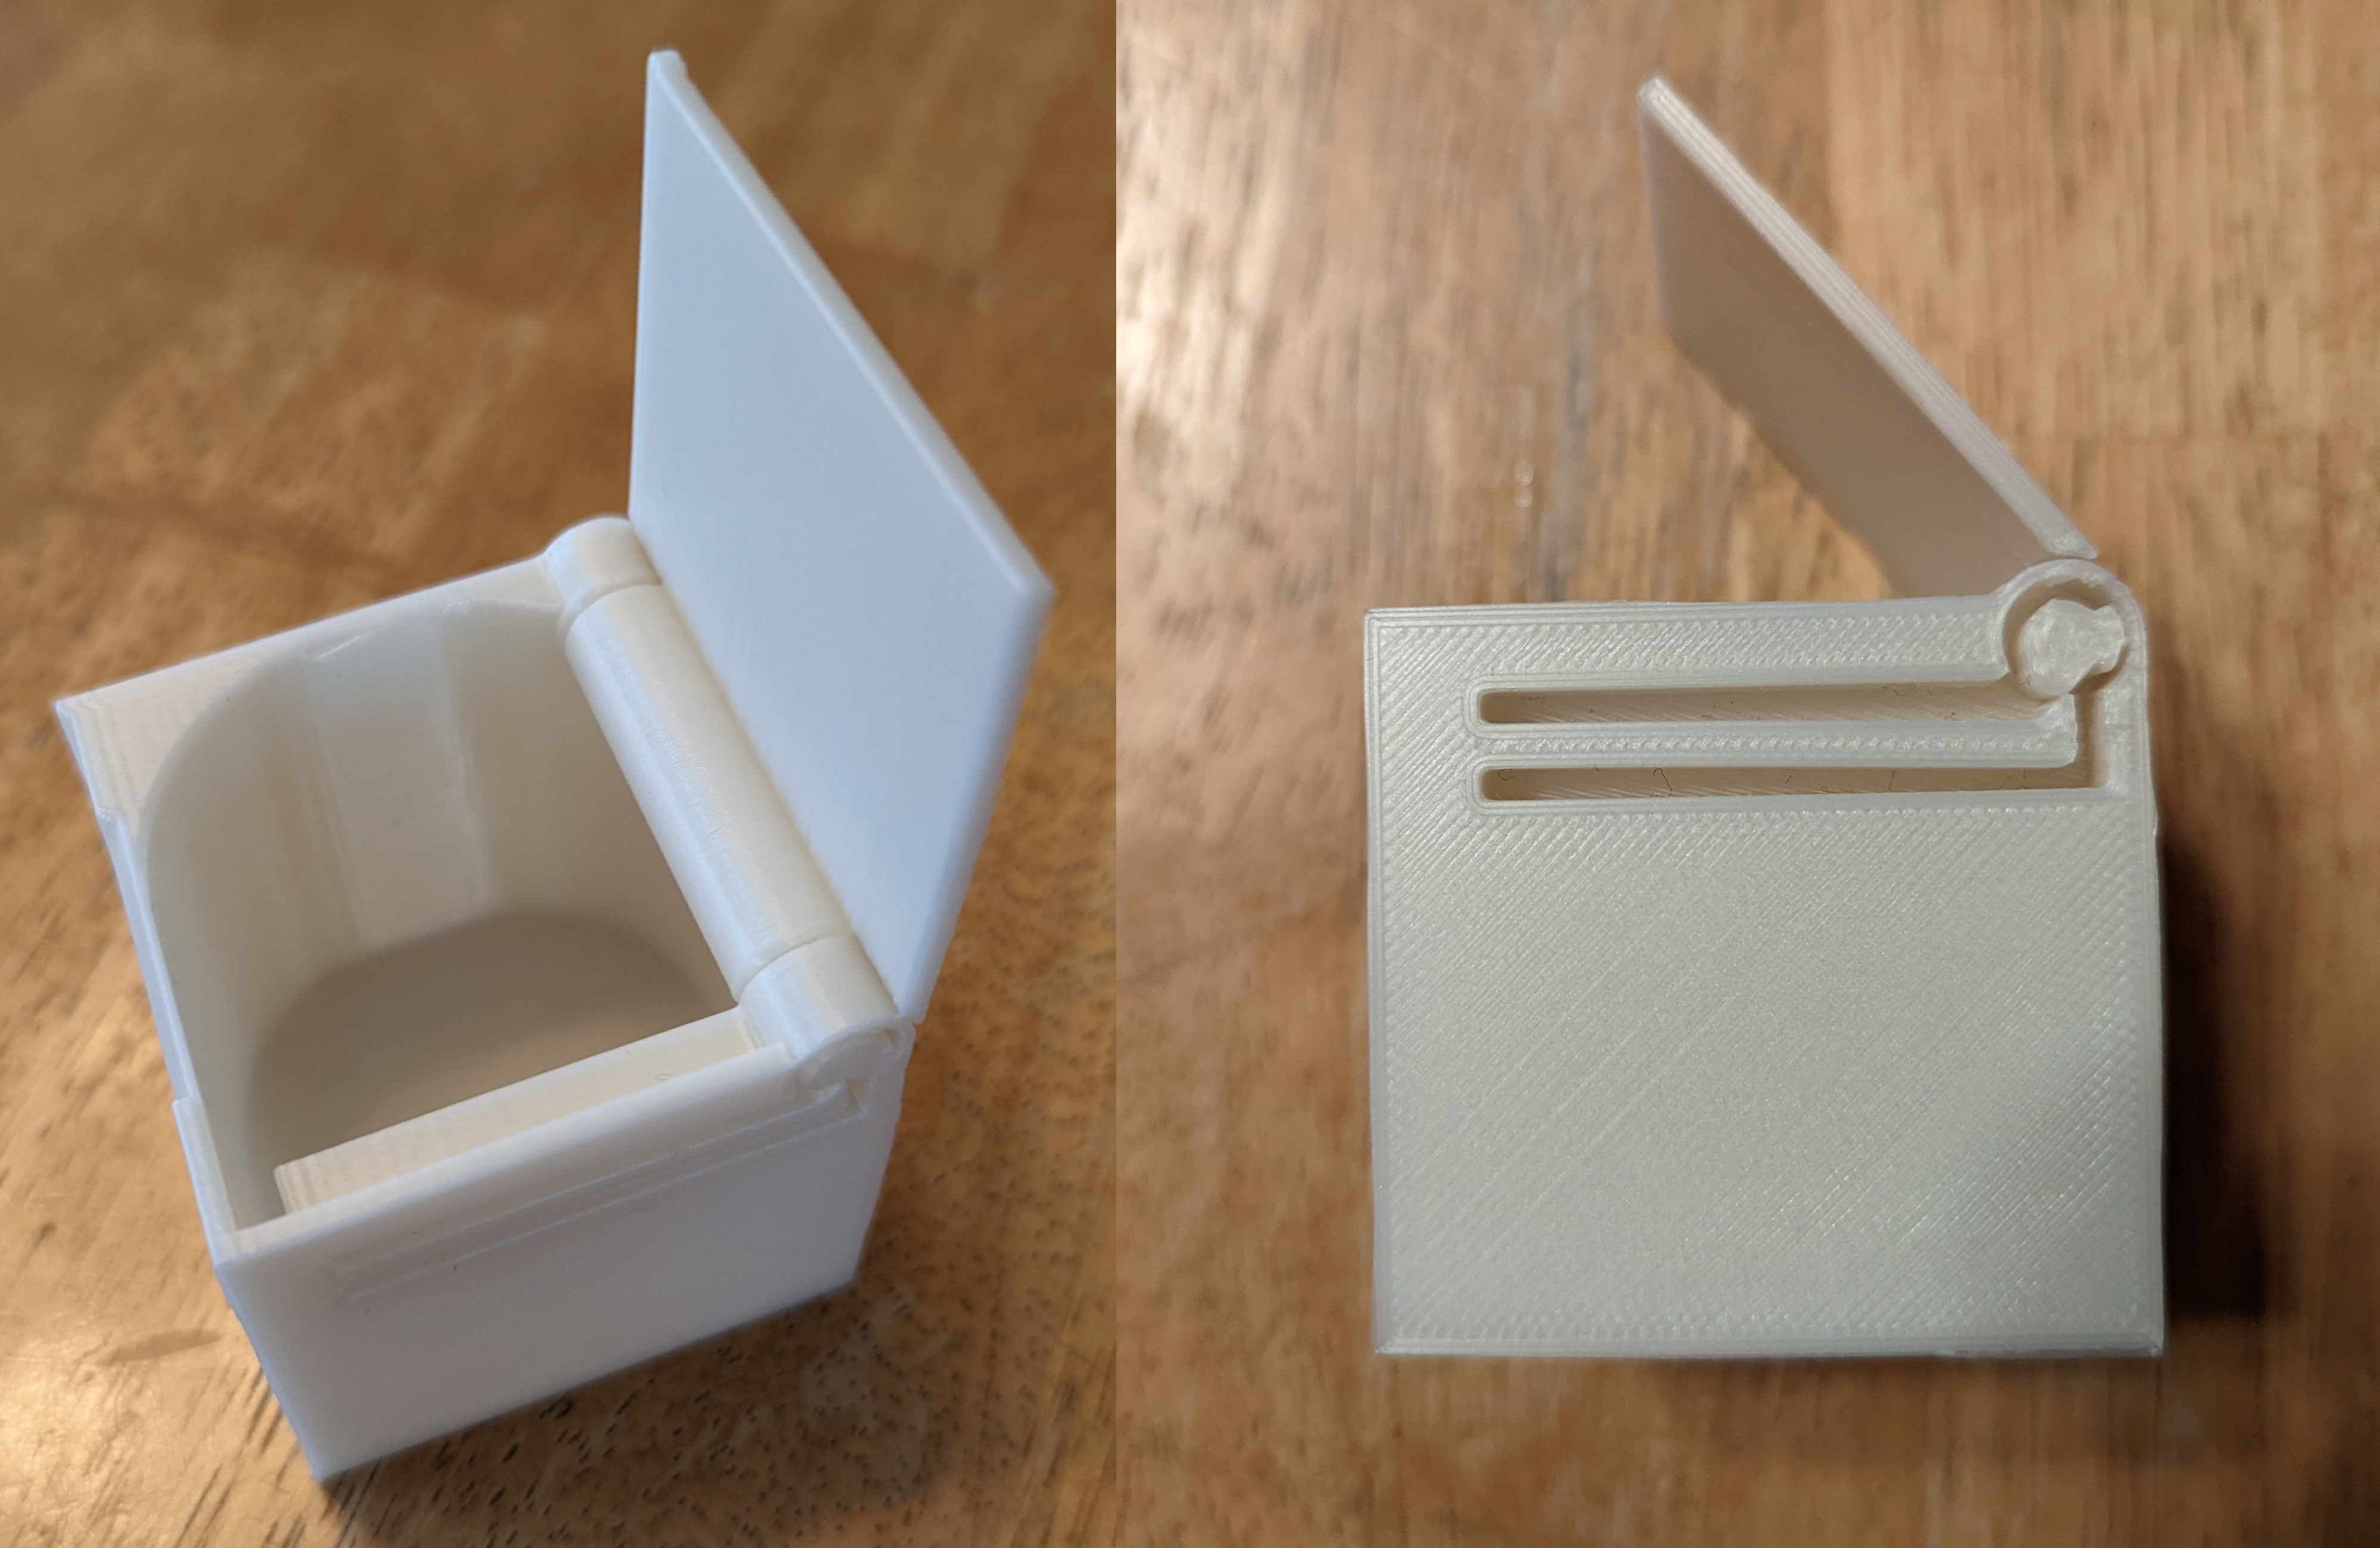 Multiple views of a 3D printed box